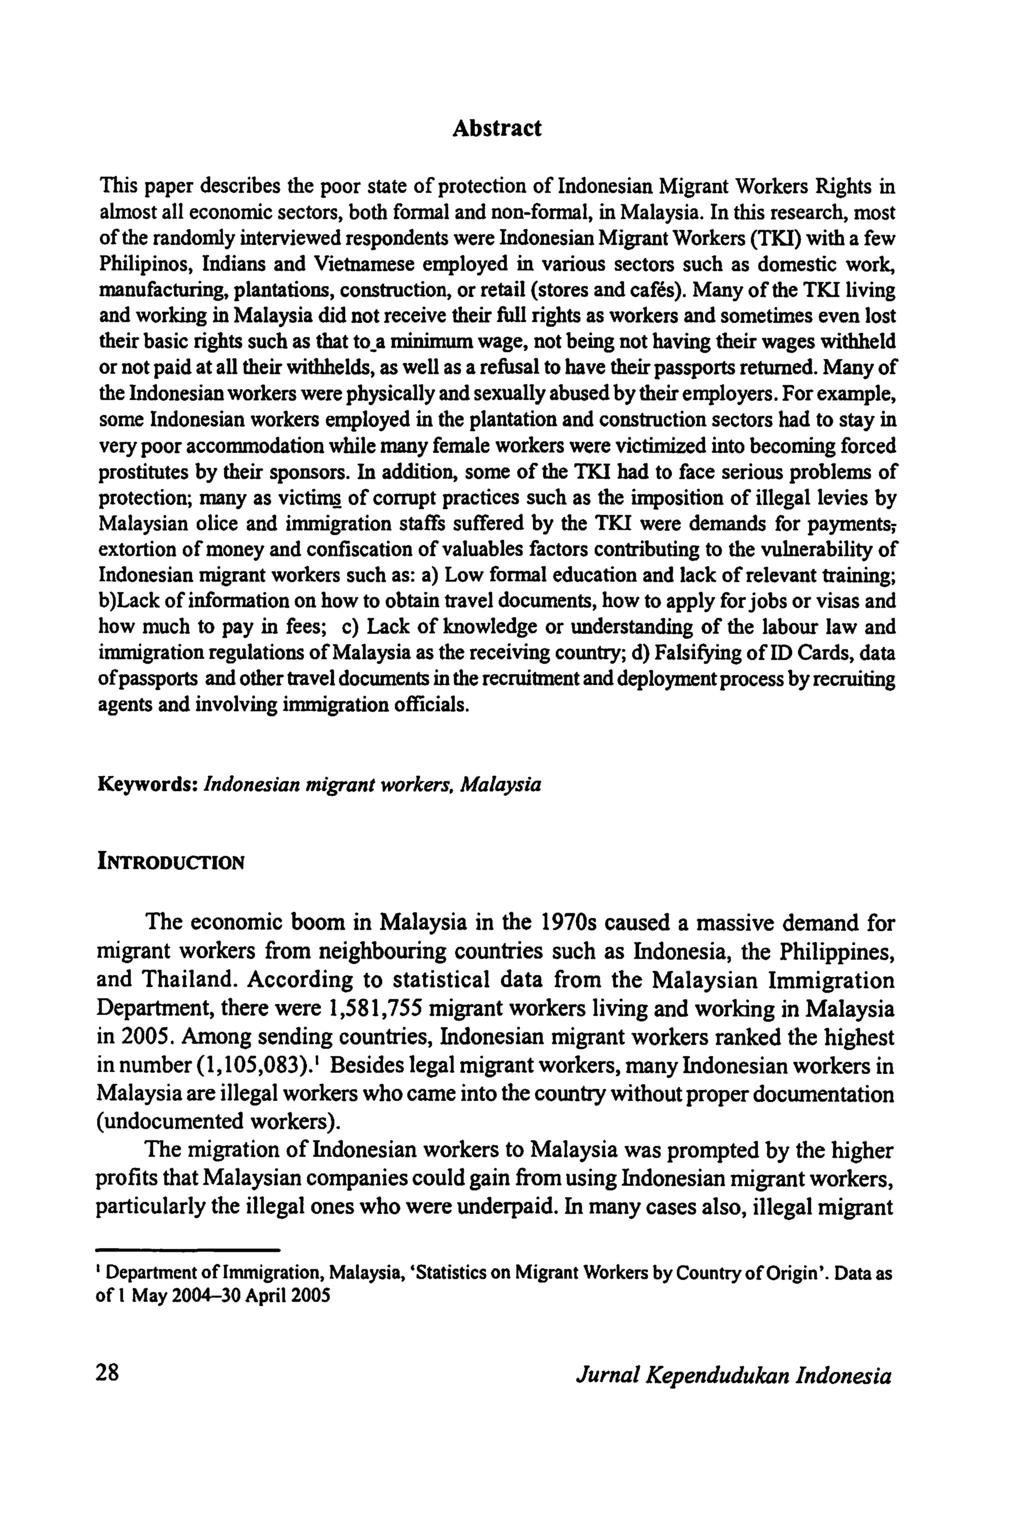 Abstract This paper describes the poor state of protection of Indonesian Migrant Workers Rights in almost all economic sectors, both formal and non-formal, in Malaysia.